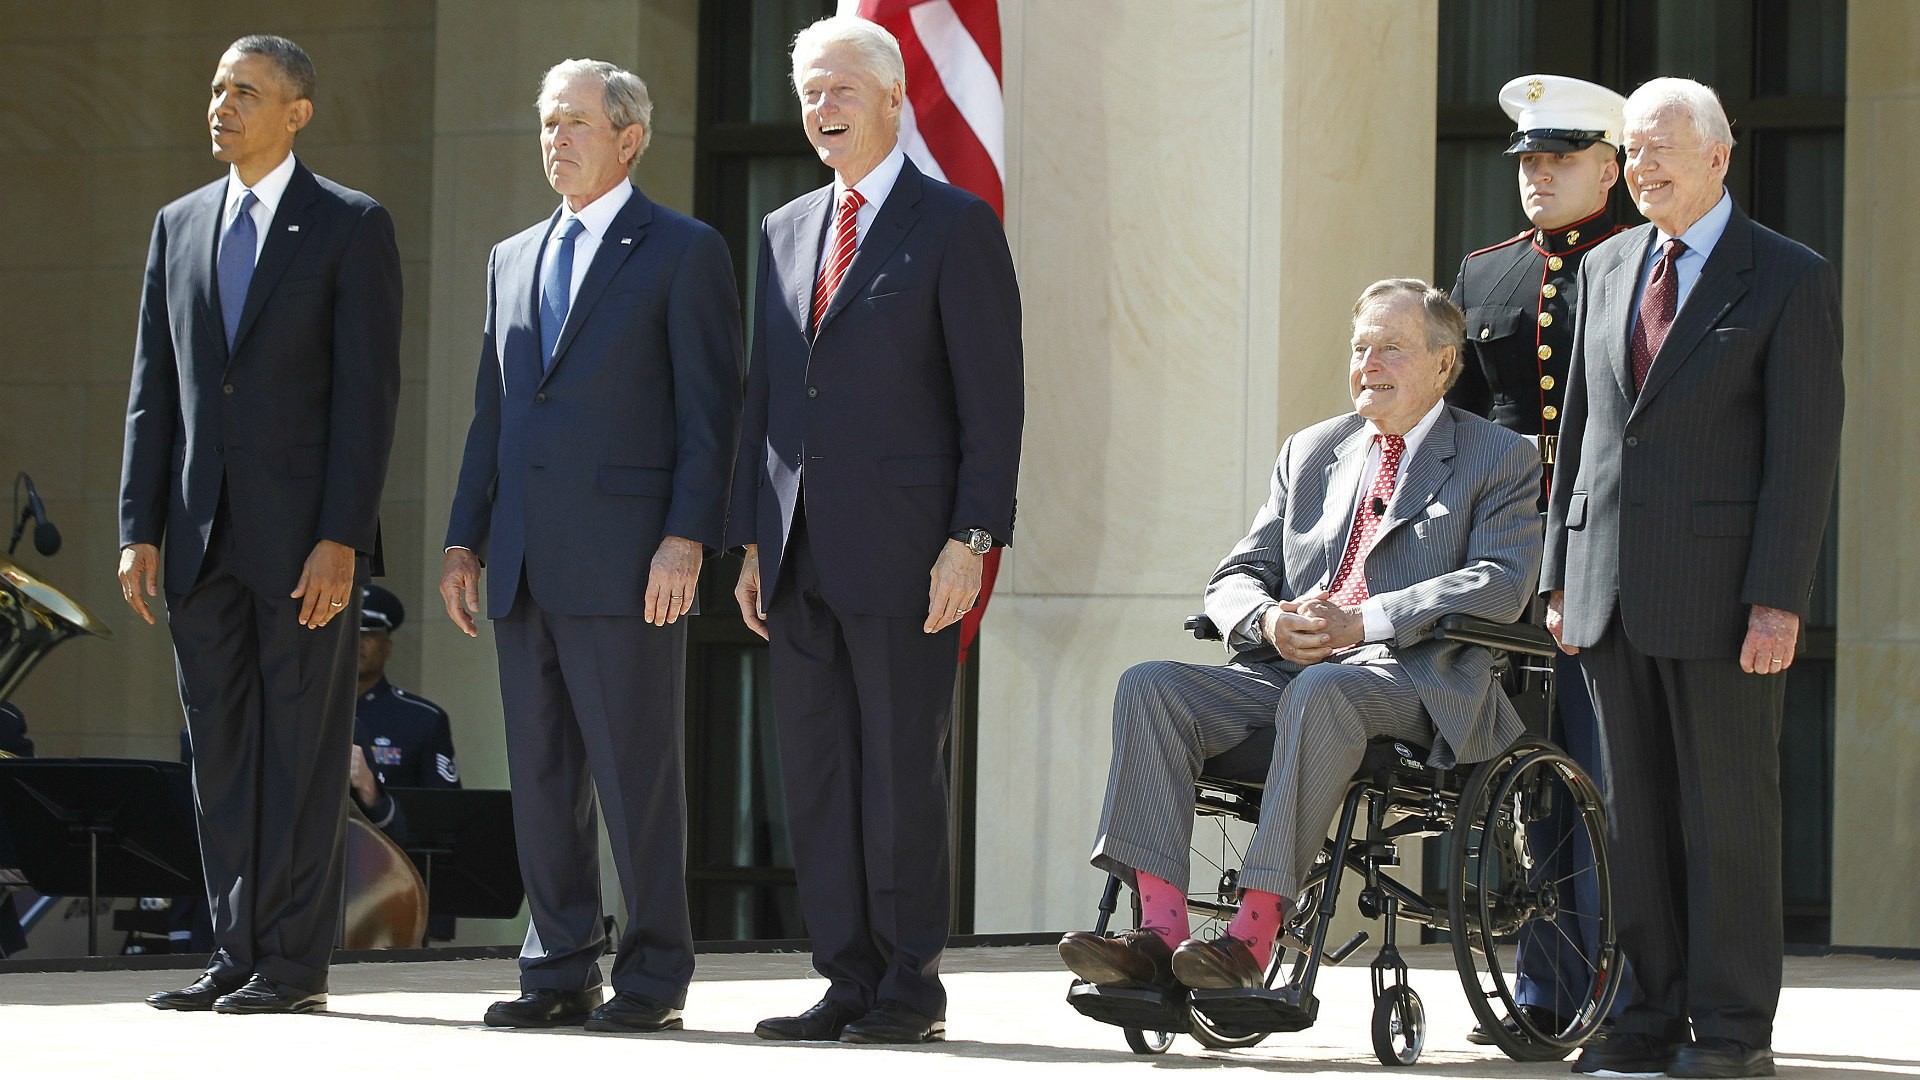 1920x1080 5 US presidents in one frame